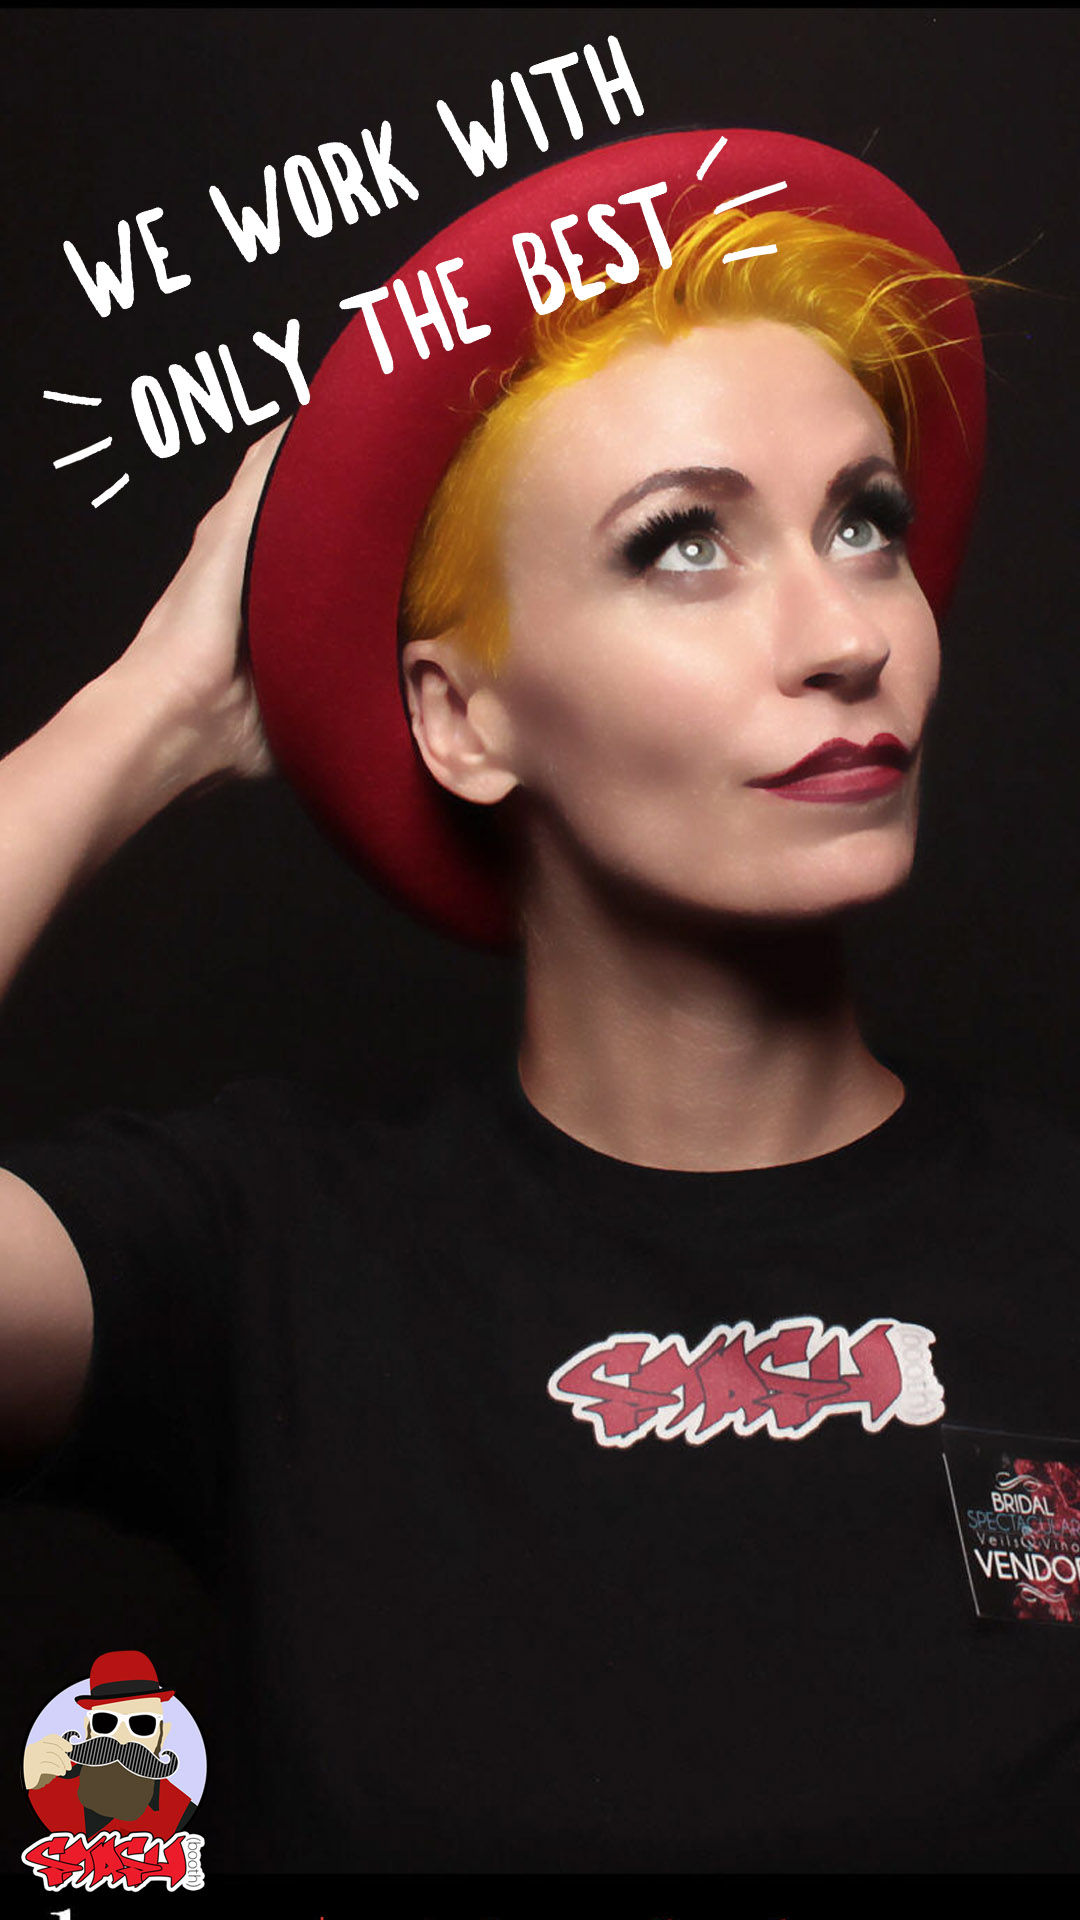 Smashbooth employee in red hat